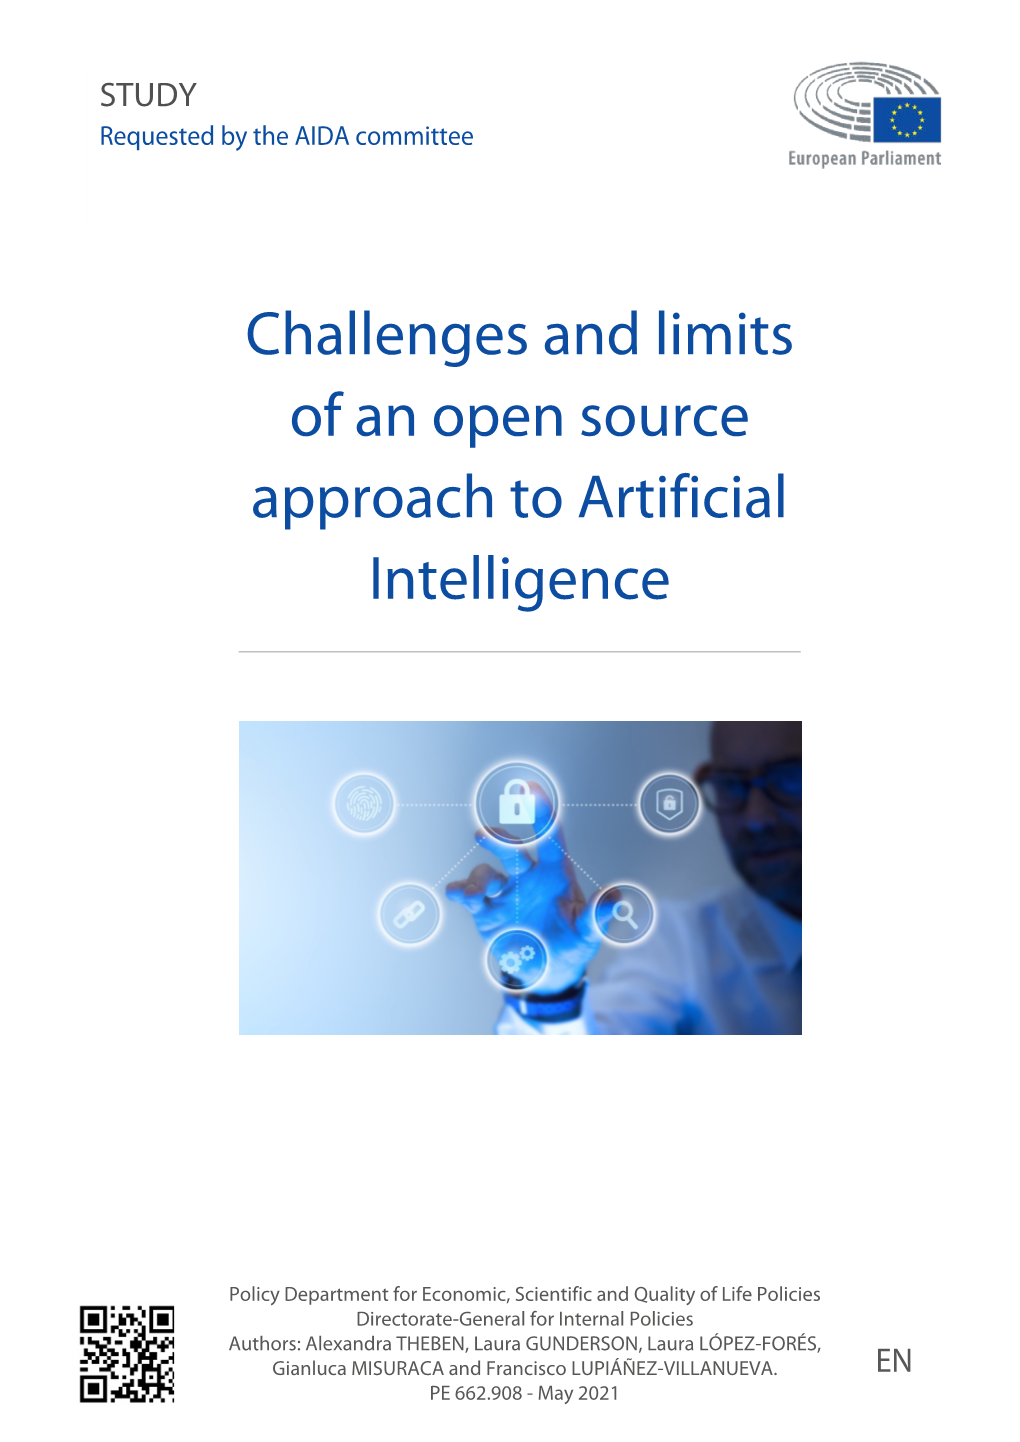 Challenges and Limits of an Open Source Approach to Artificial Intelligence